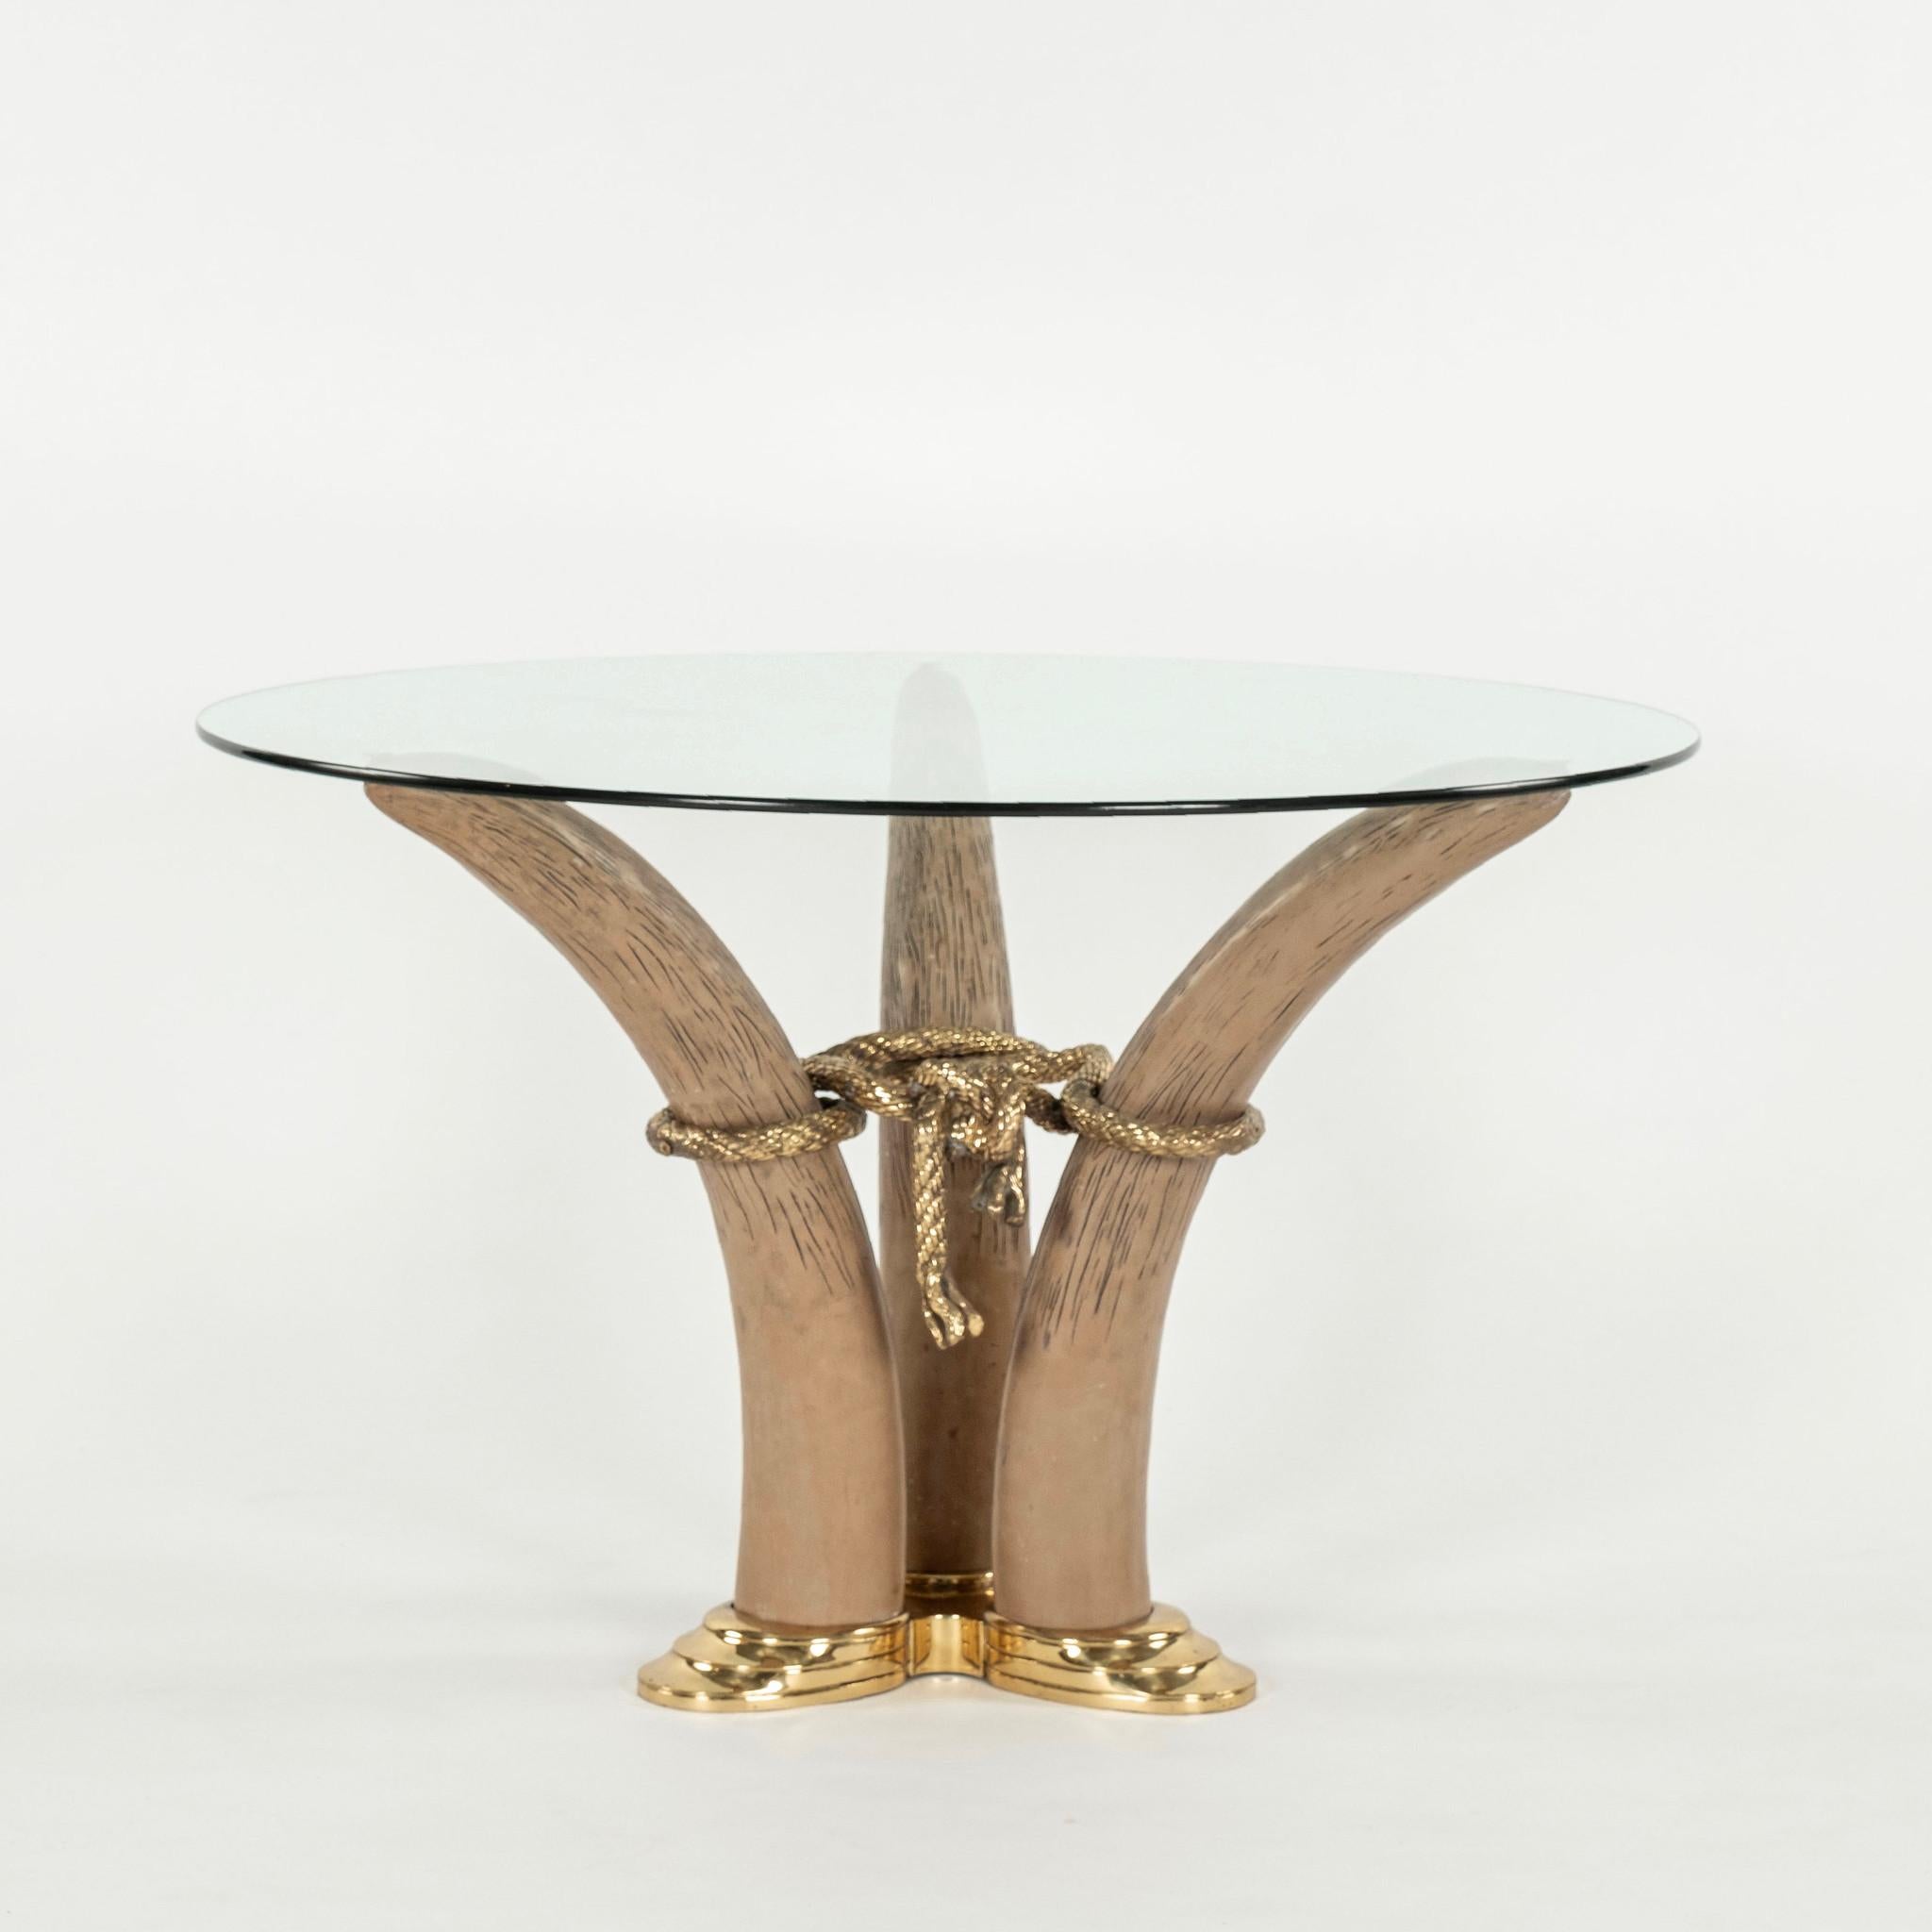 Italo Valenti Faux Tusk Brass Occasional Glass Table In Good Condition For Sale In Houston, TX